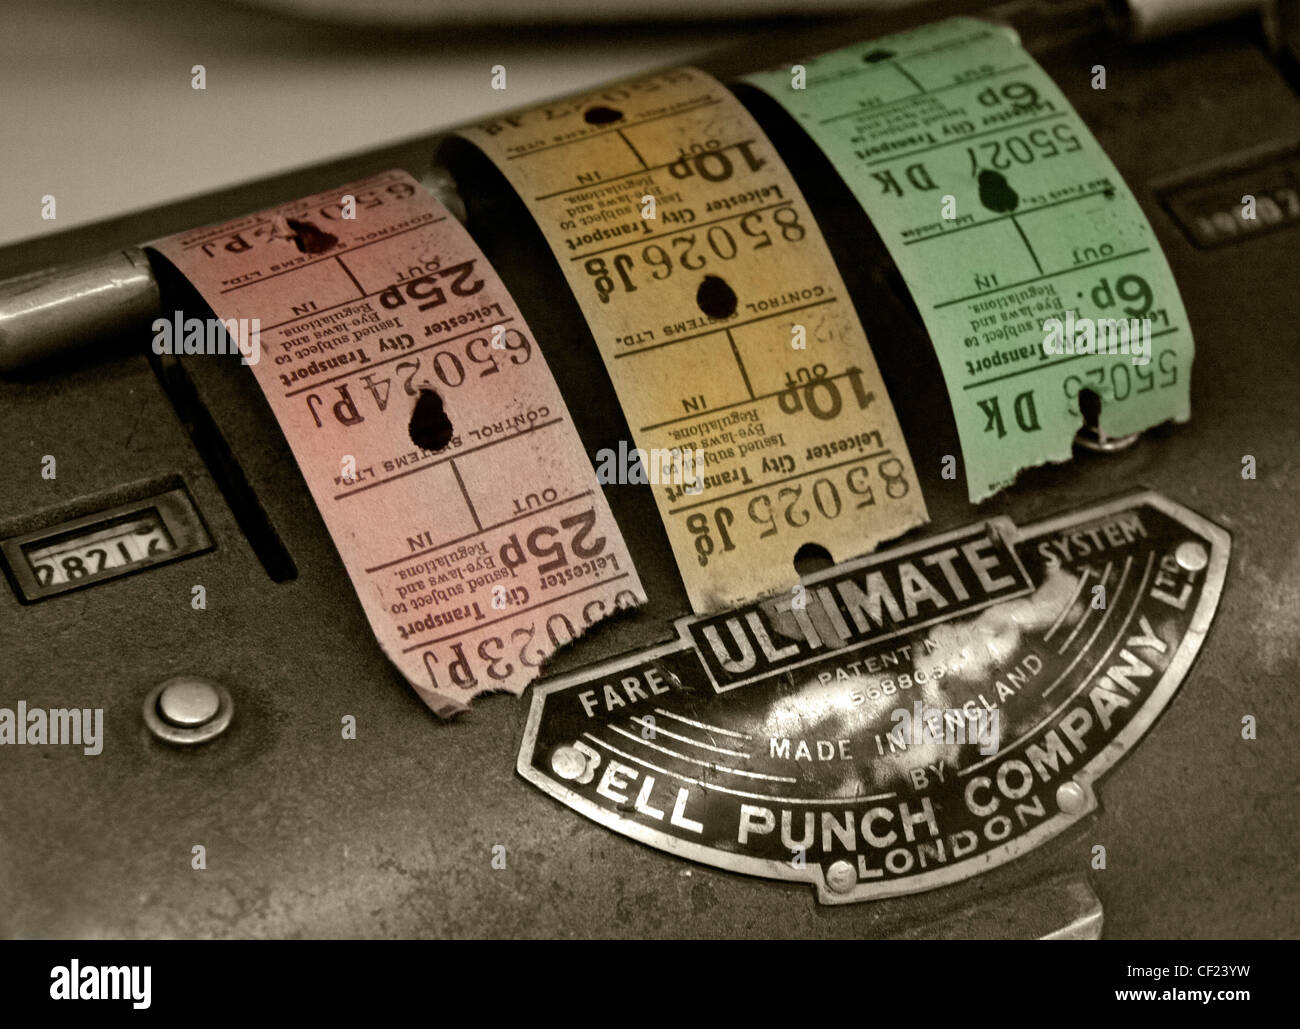 Ultimative Bell Punch Company Bus Ticket Automat mit farbigen Karten Made in England Stockfoto